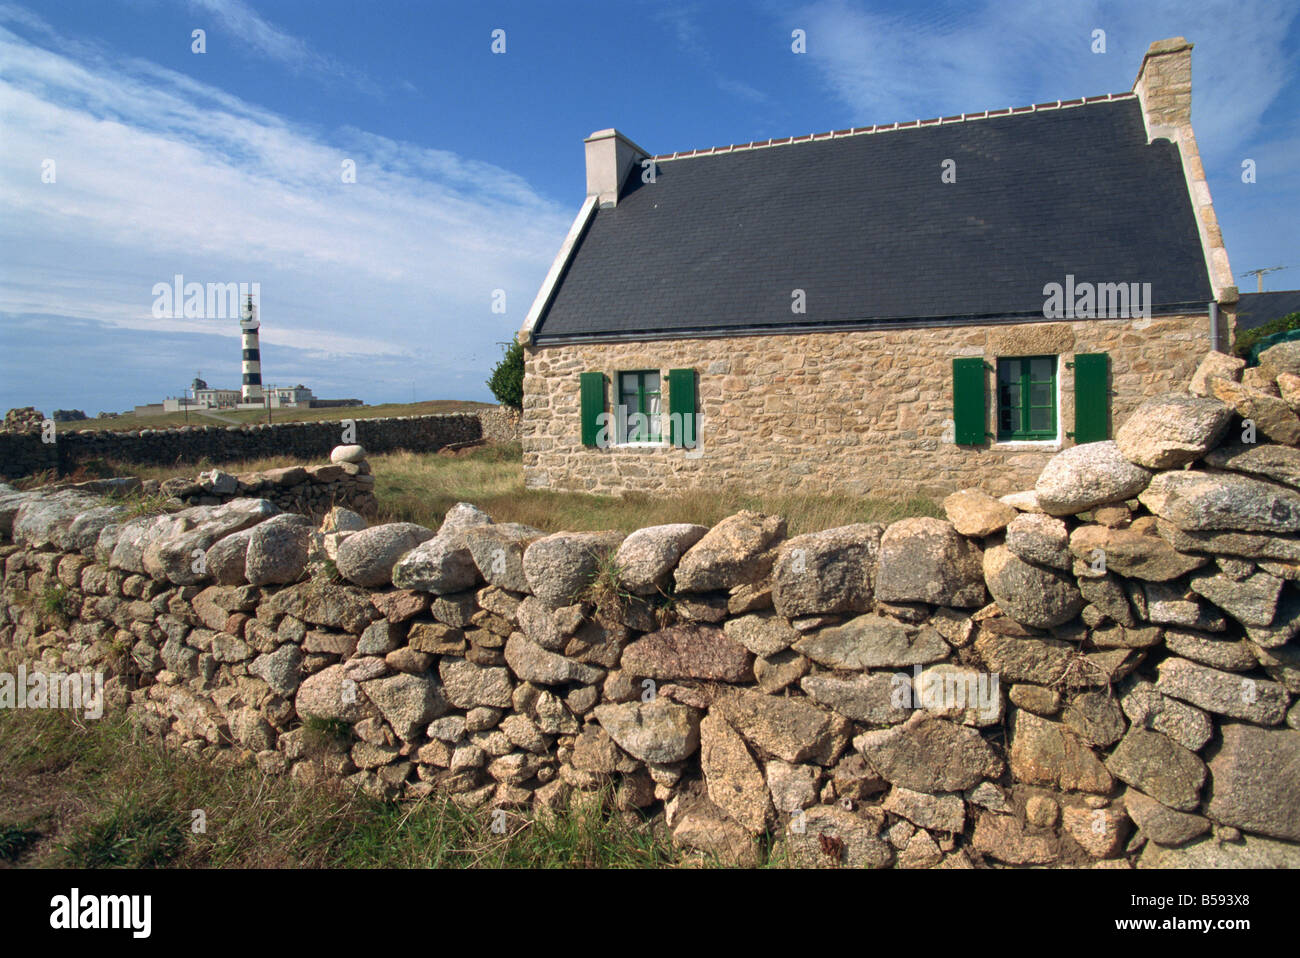 Stone wall and ancient house with the Creach lighthouse in the background on Ouessant island Brittany France G Thouvenin Stock Photo